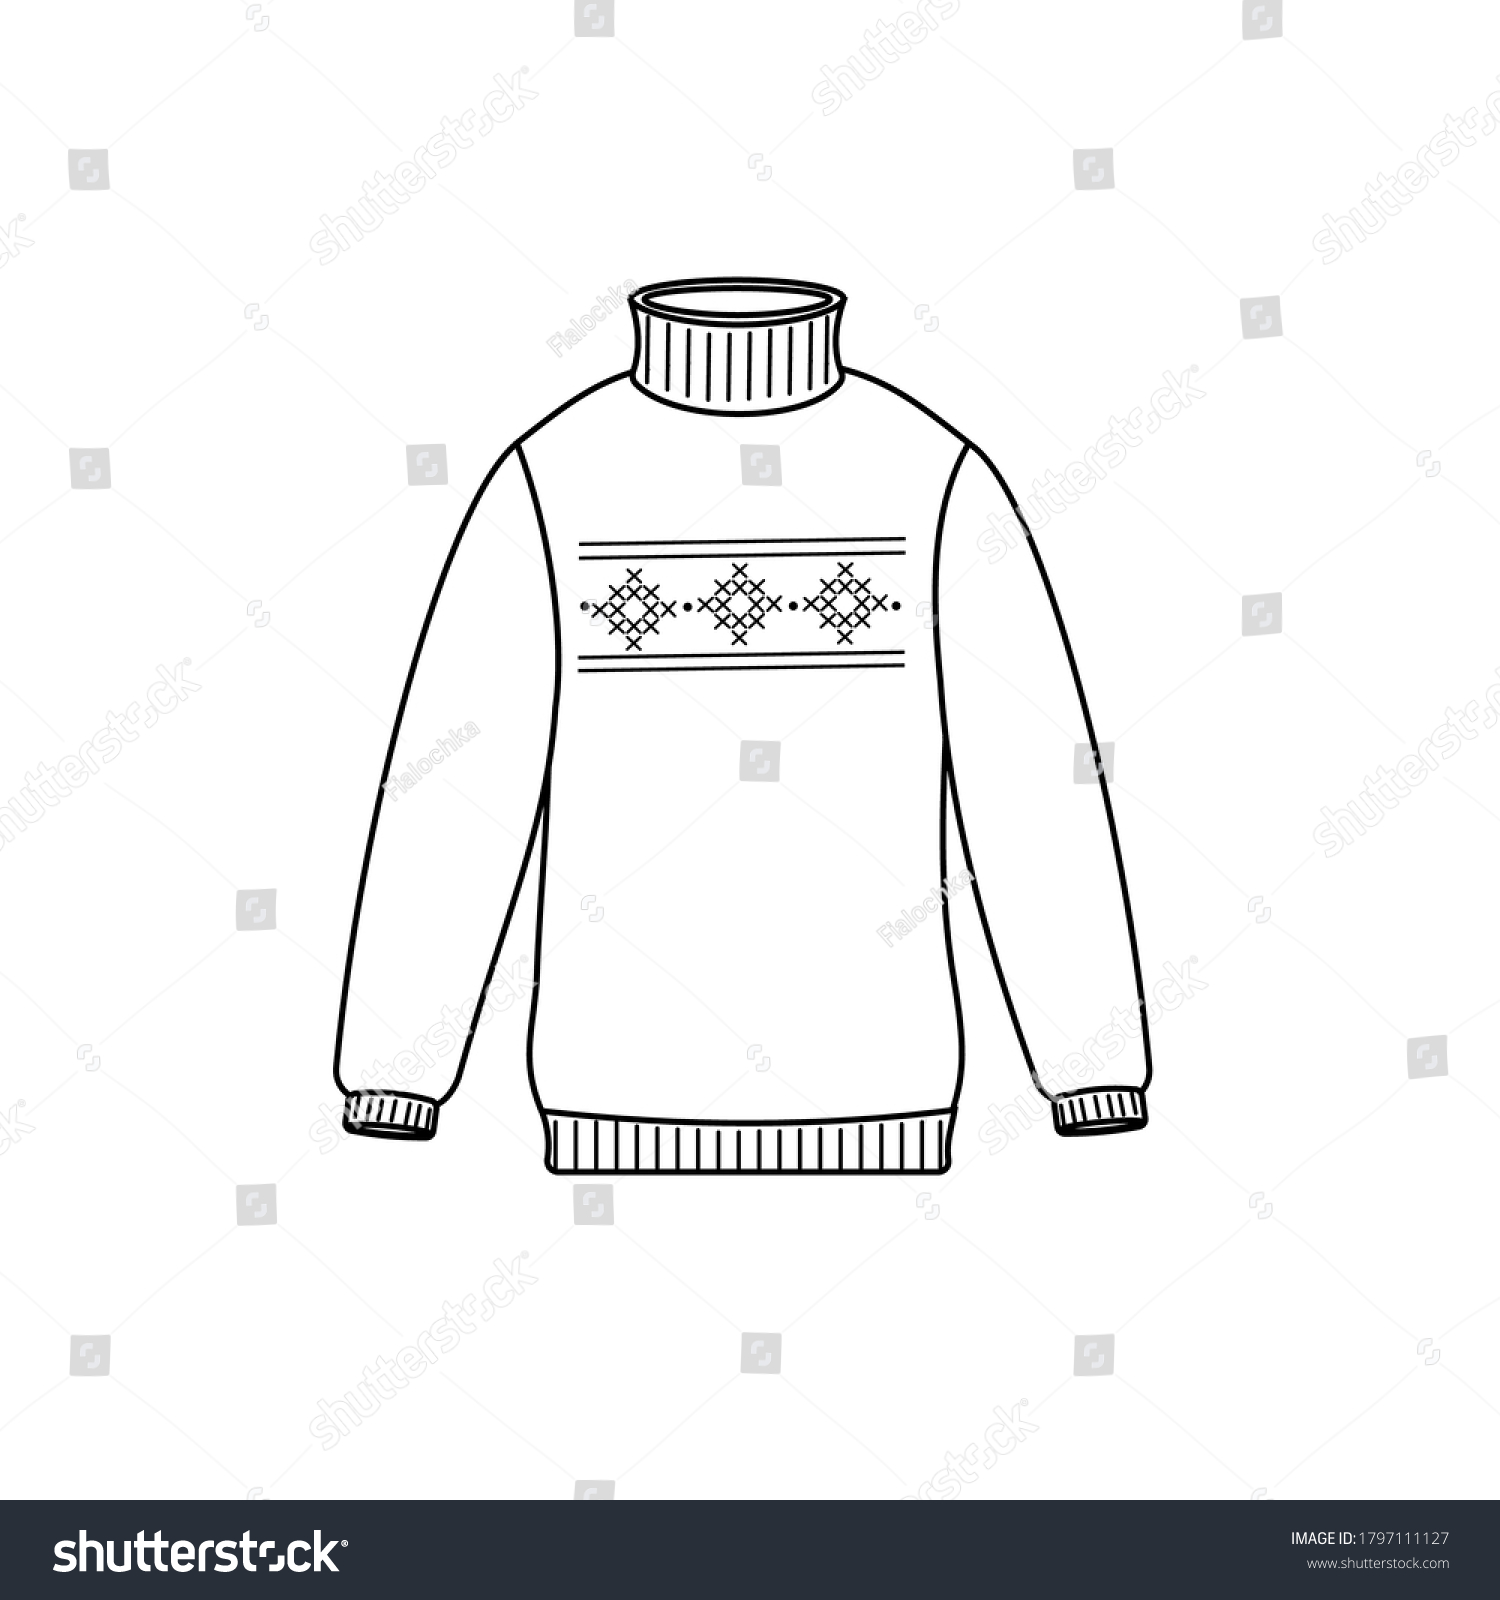 Sweater Drawn Black Outline Sketch Clipart Stock Vector (Royalty Free ...